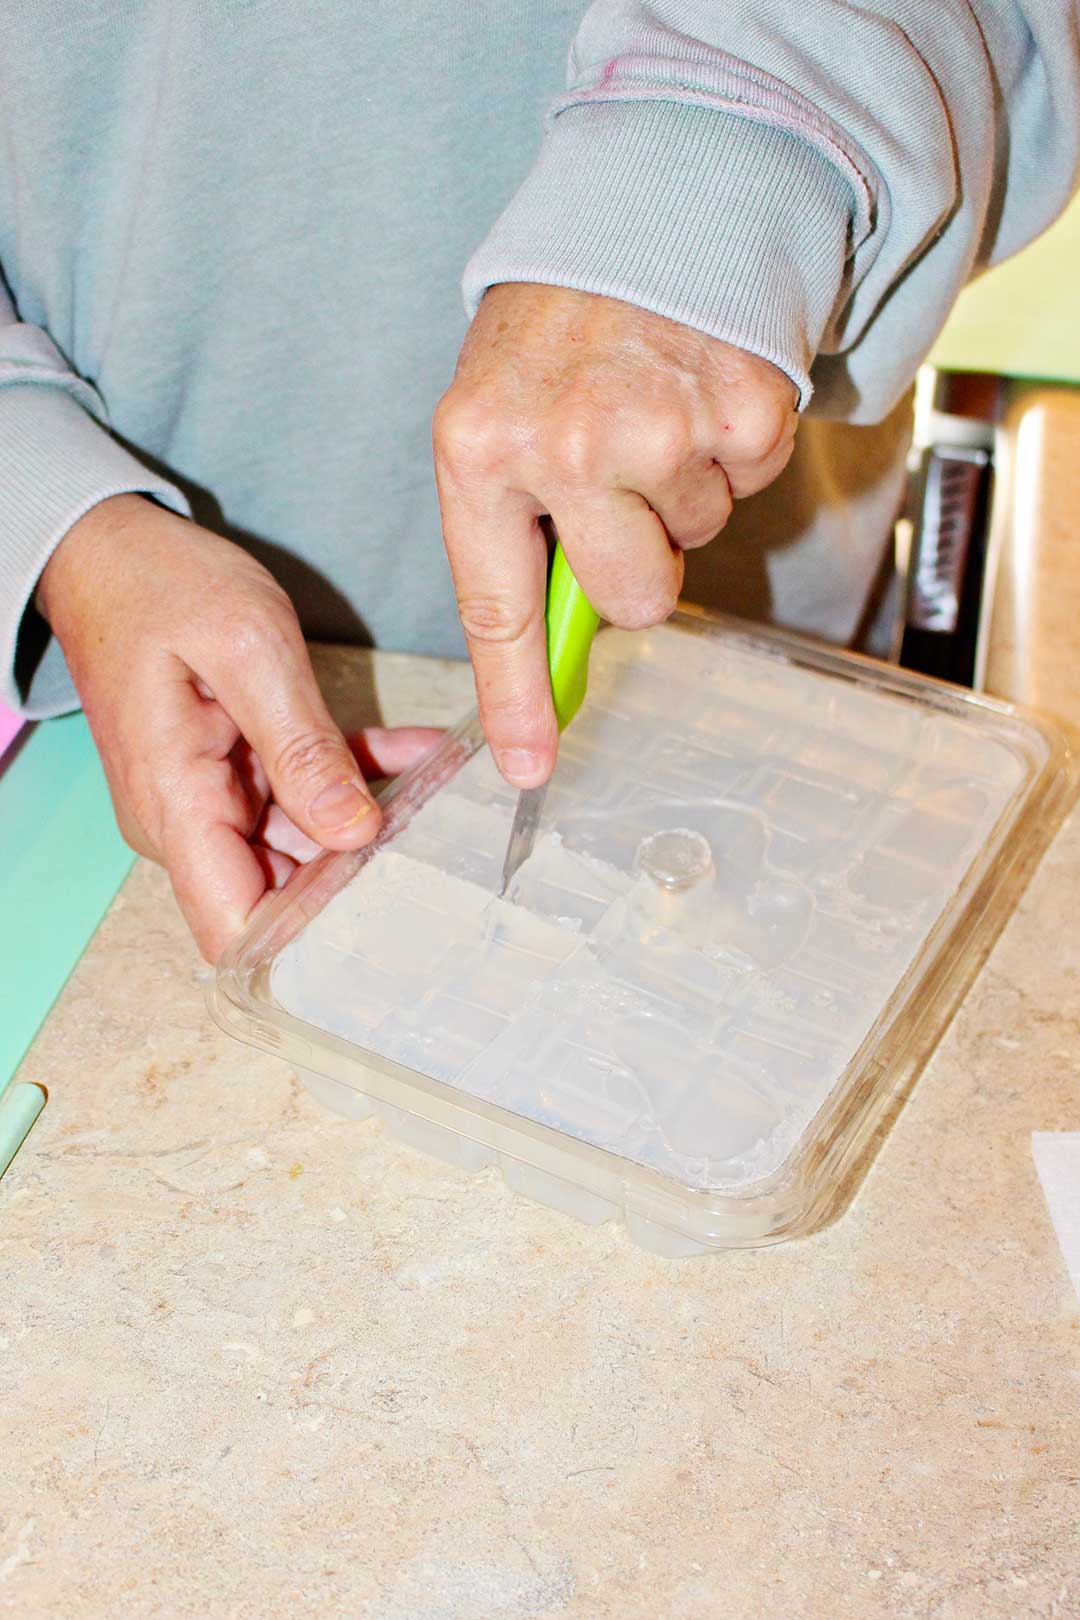 Woman slicing through block bulk clear soap with bright green knife.